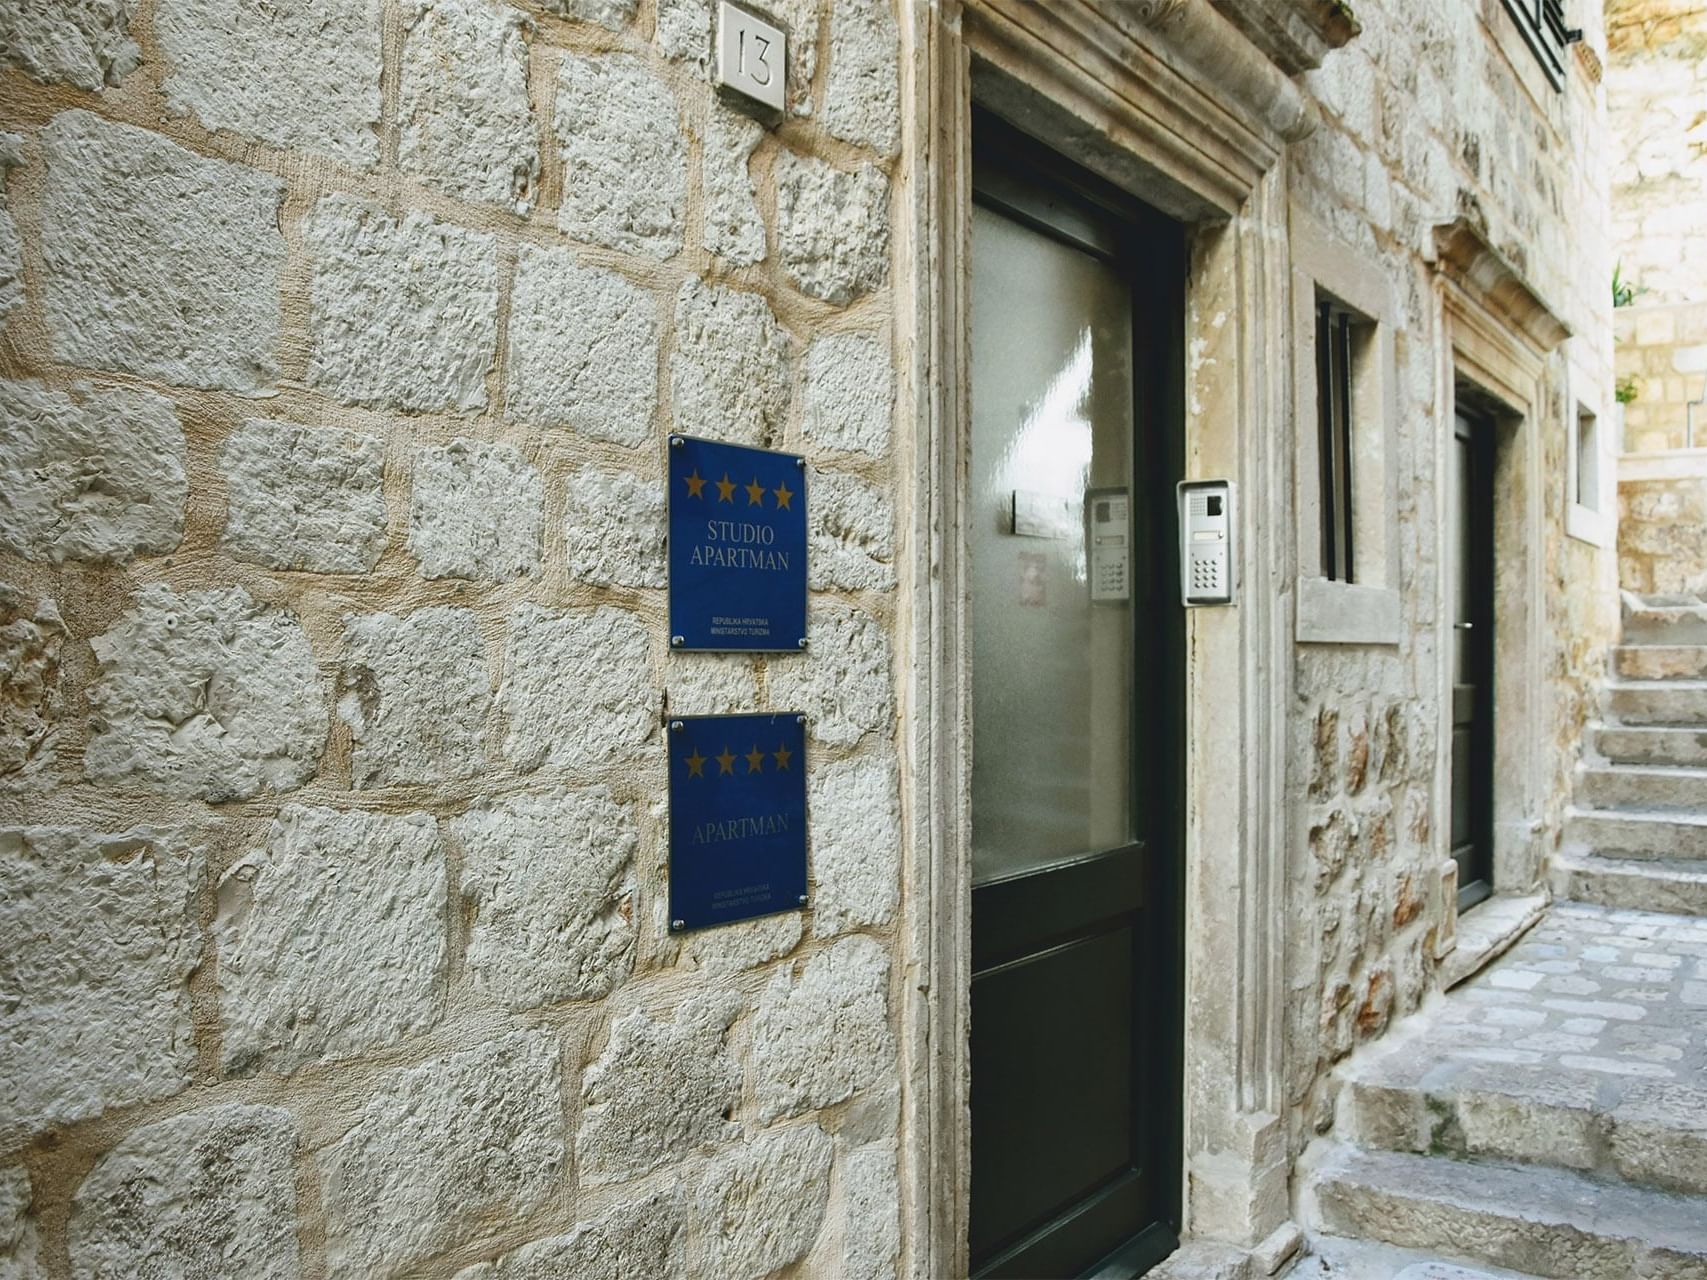 Exterior view of Celenga Apartments with stone walls